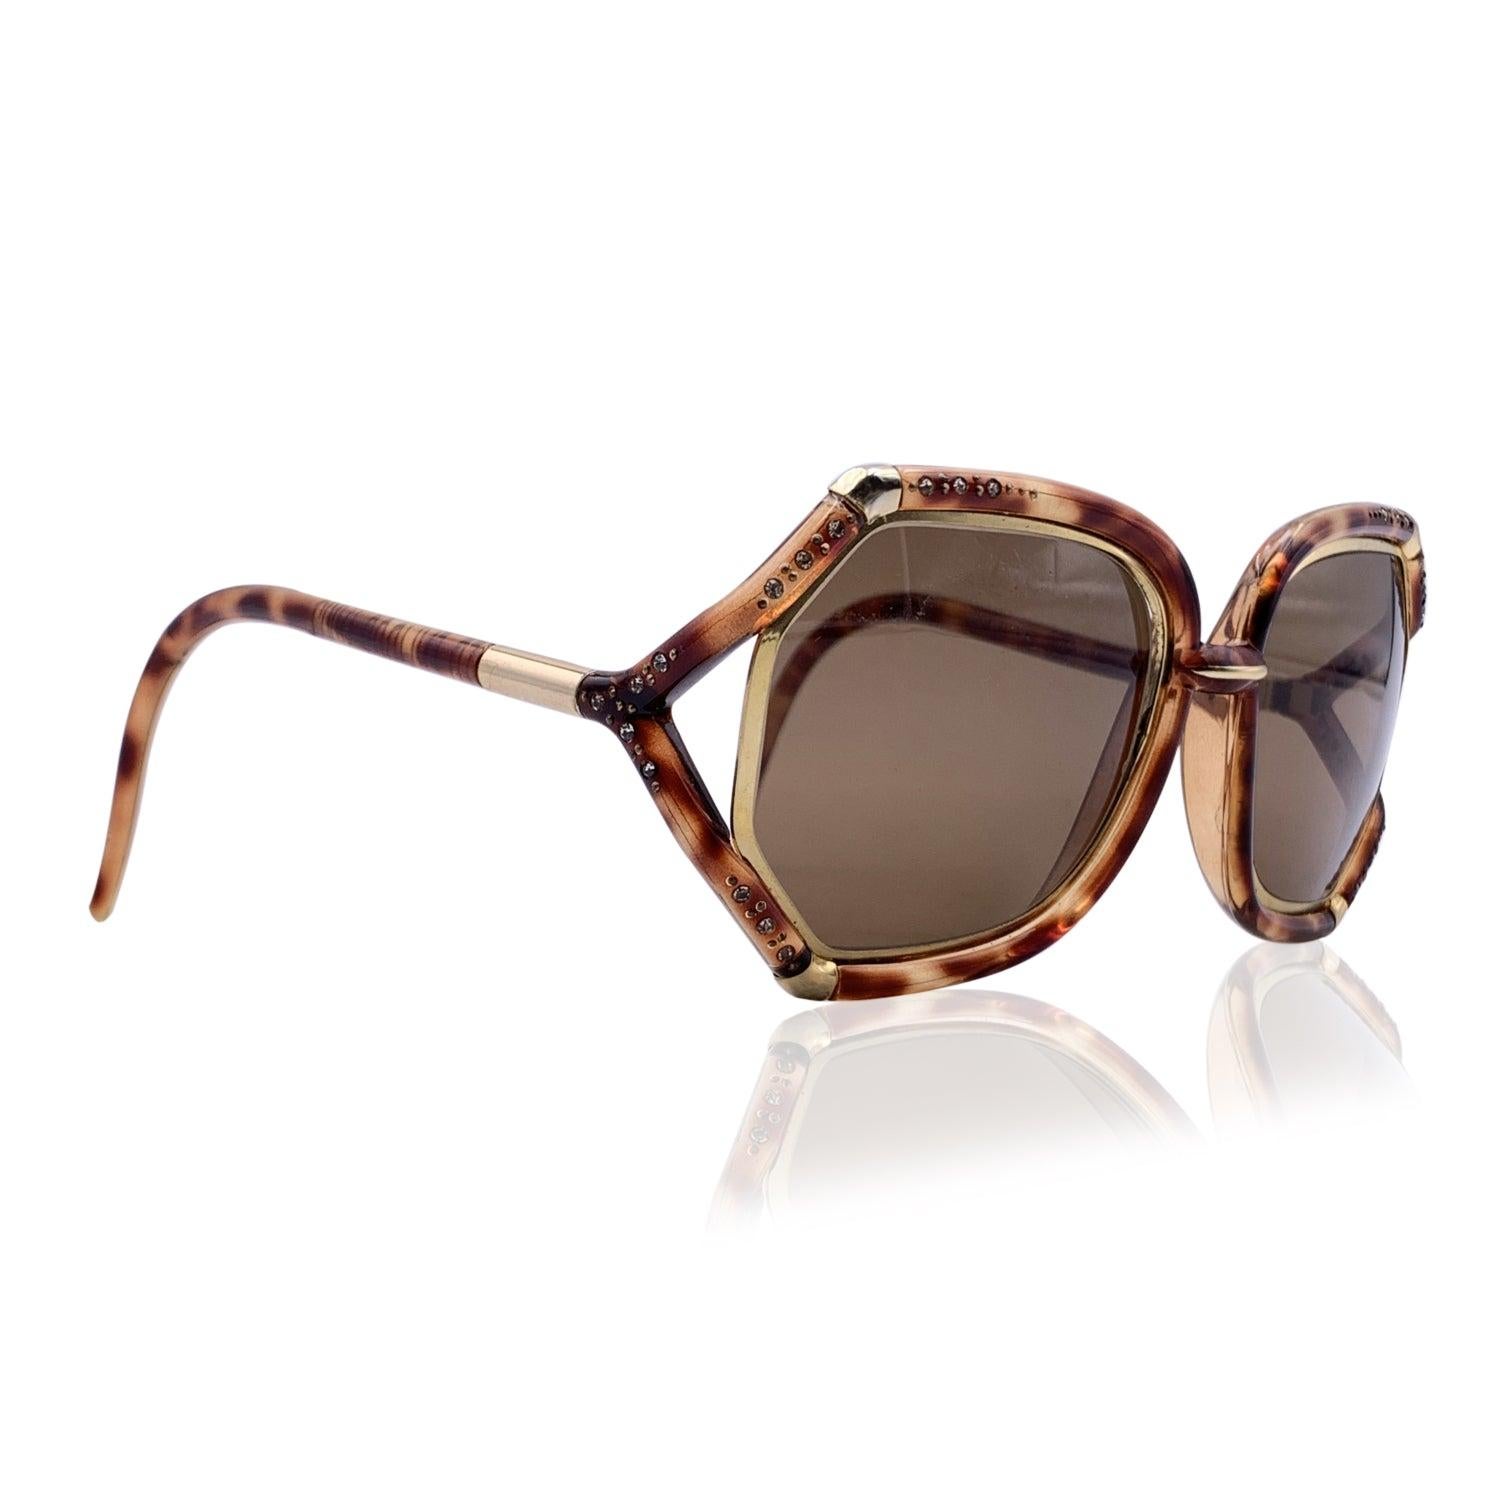 Rare vintage TED LAPIDUS oversized sunglasses mod. TL1002 Made in France. Cut-out brown acetate frame, with gold metal finish. Crystals embellishment on the front. Brown lenses. 100% UV protection. The same model was worn by Jennifer Lawrence in the